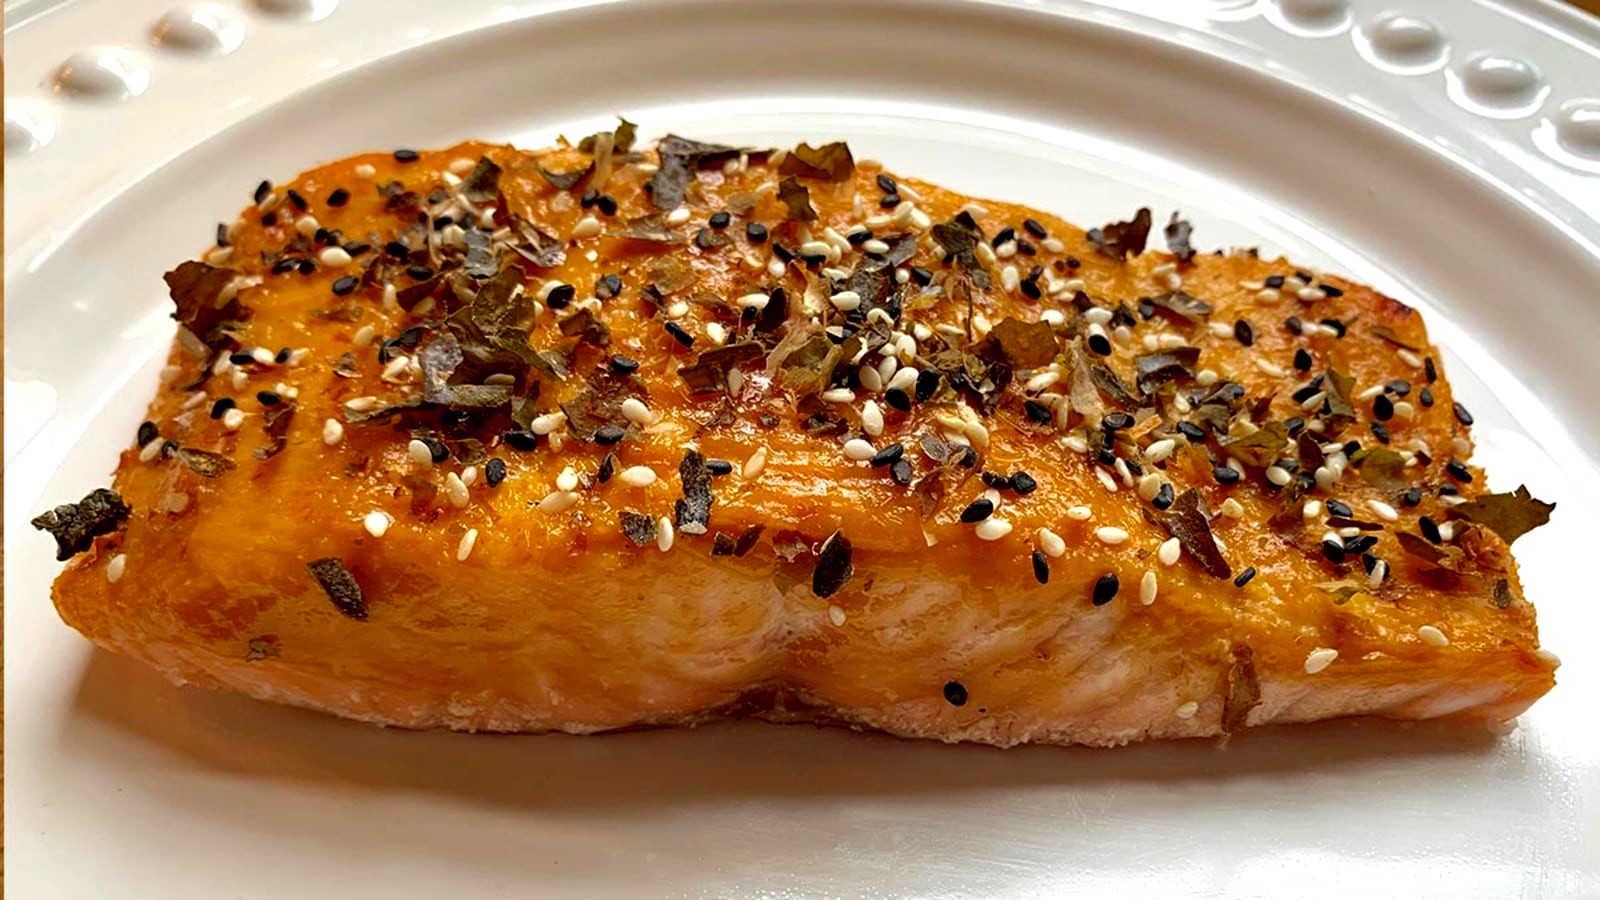 Image of Miso-Glazed Salmon topped with Bonito Seaweed Sprinkles